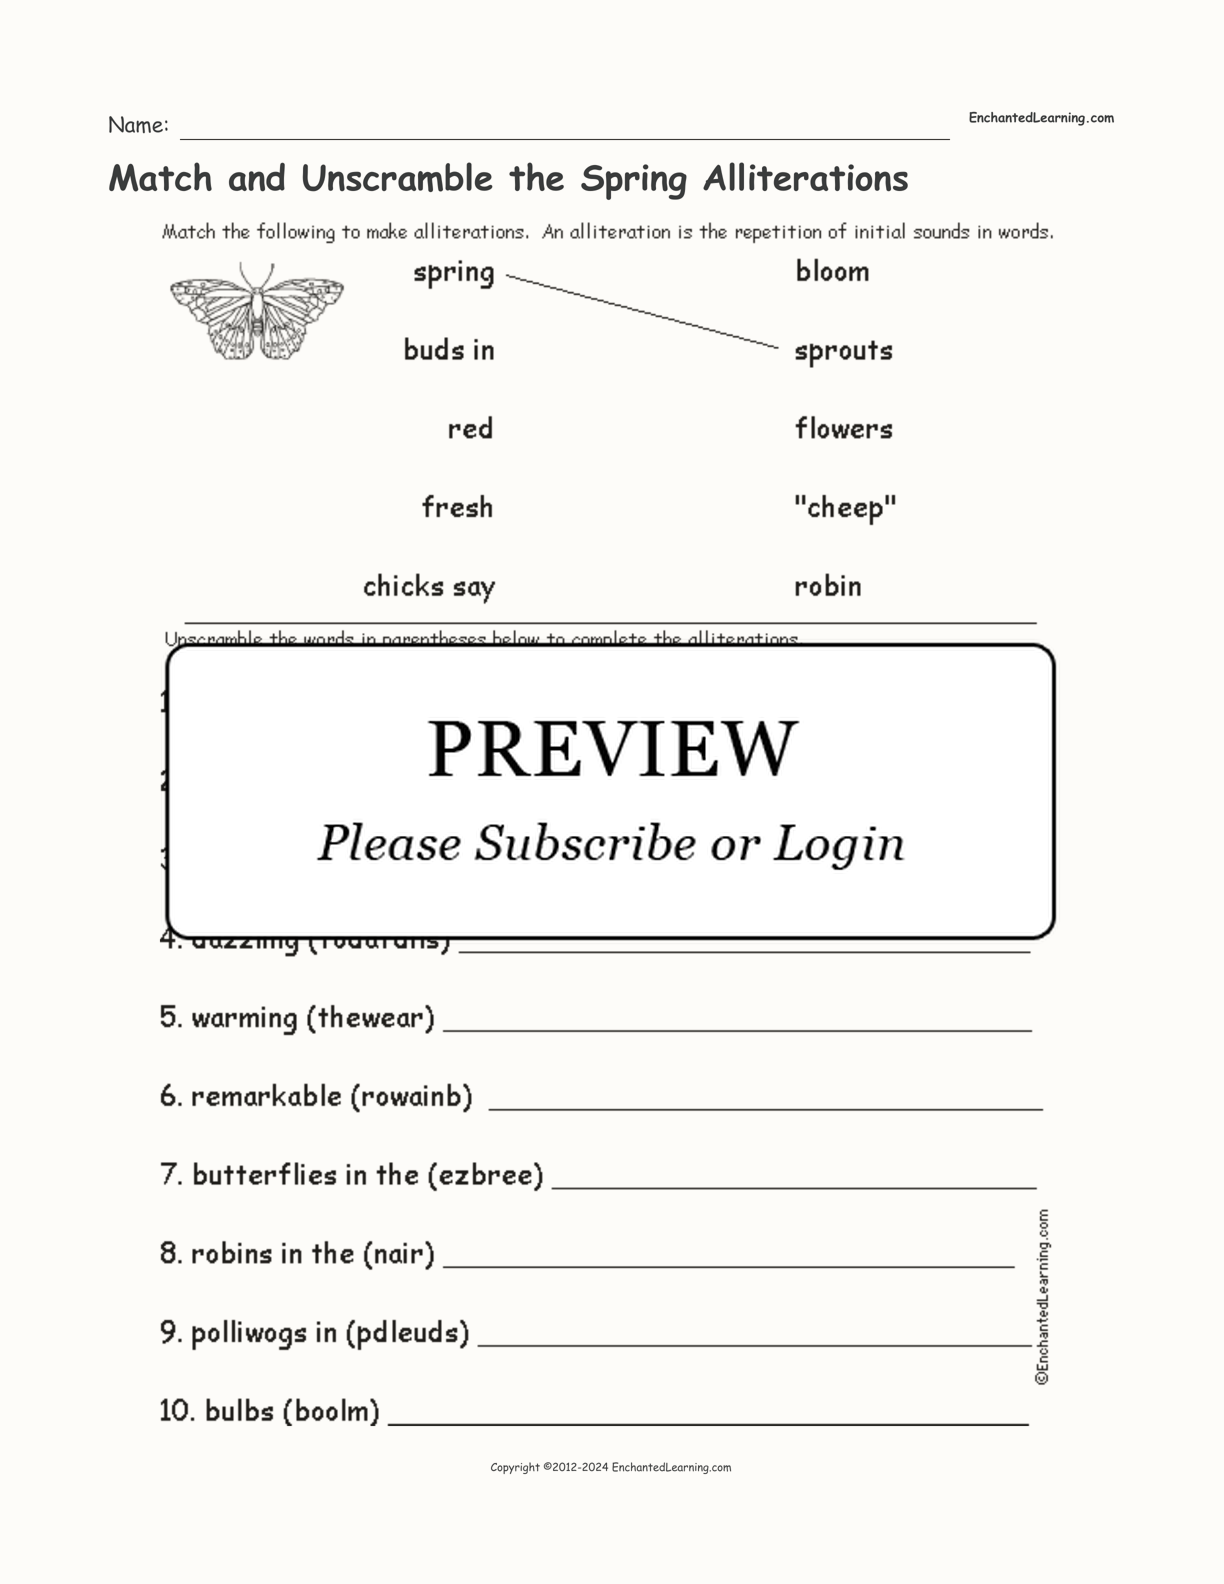 Match and Unscramble the Spring Alliterations interactive worksheet page 1